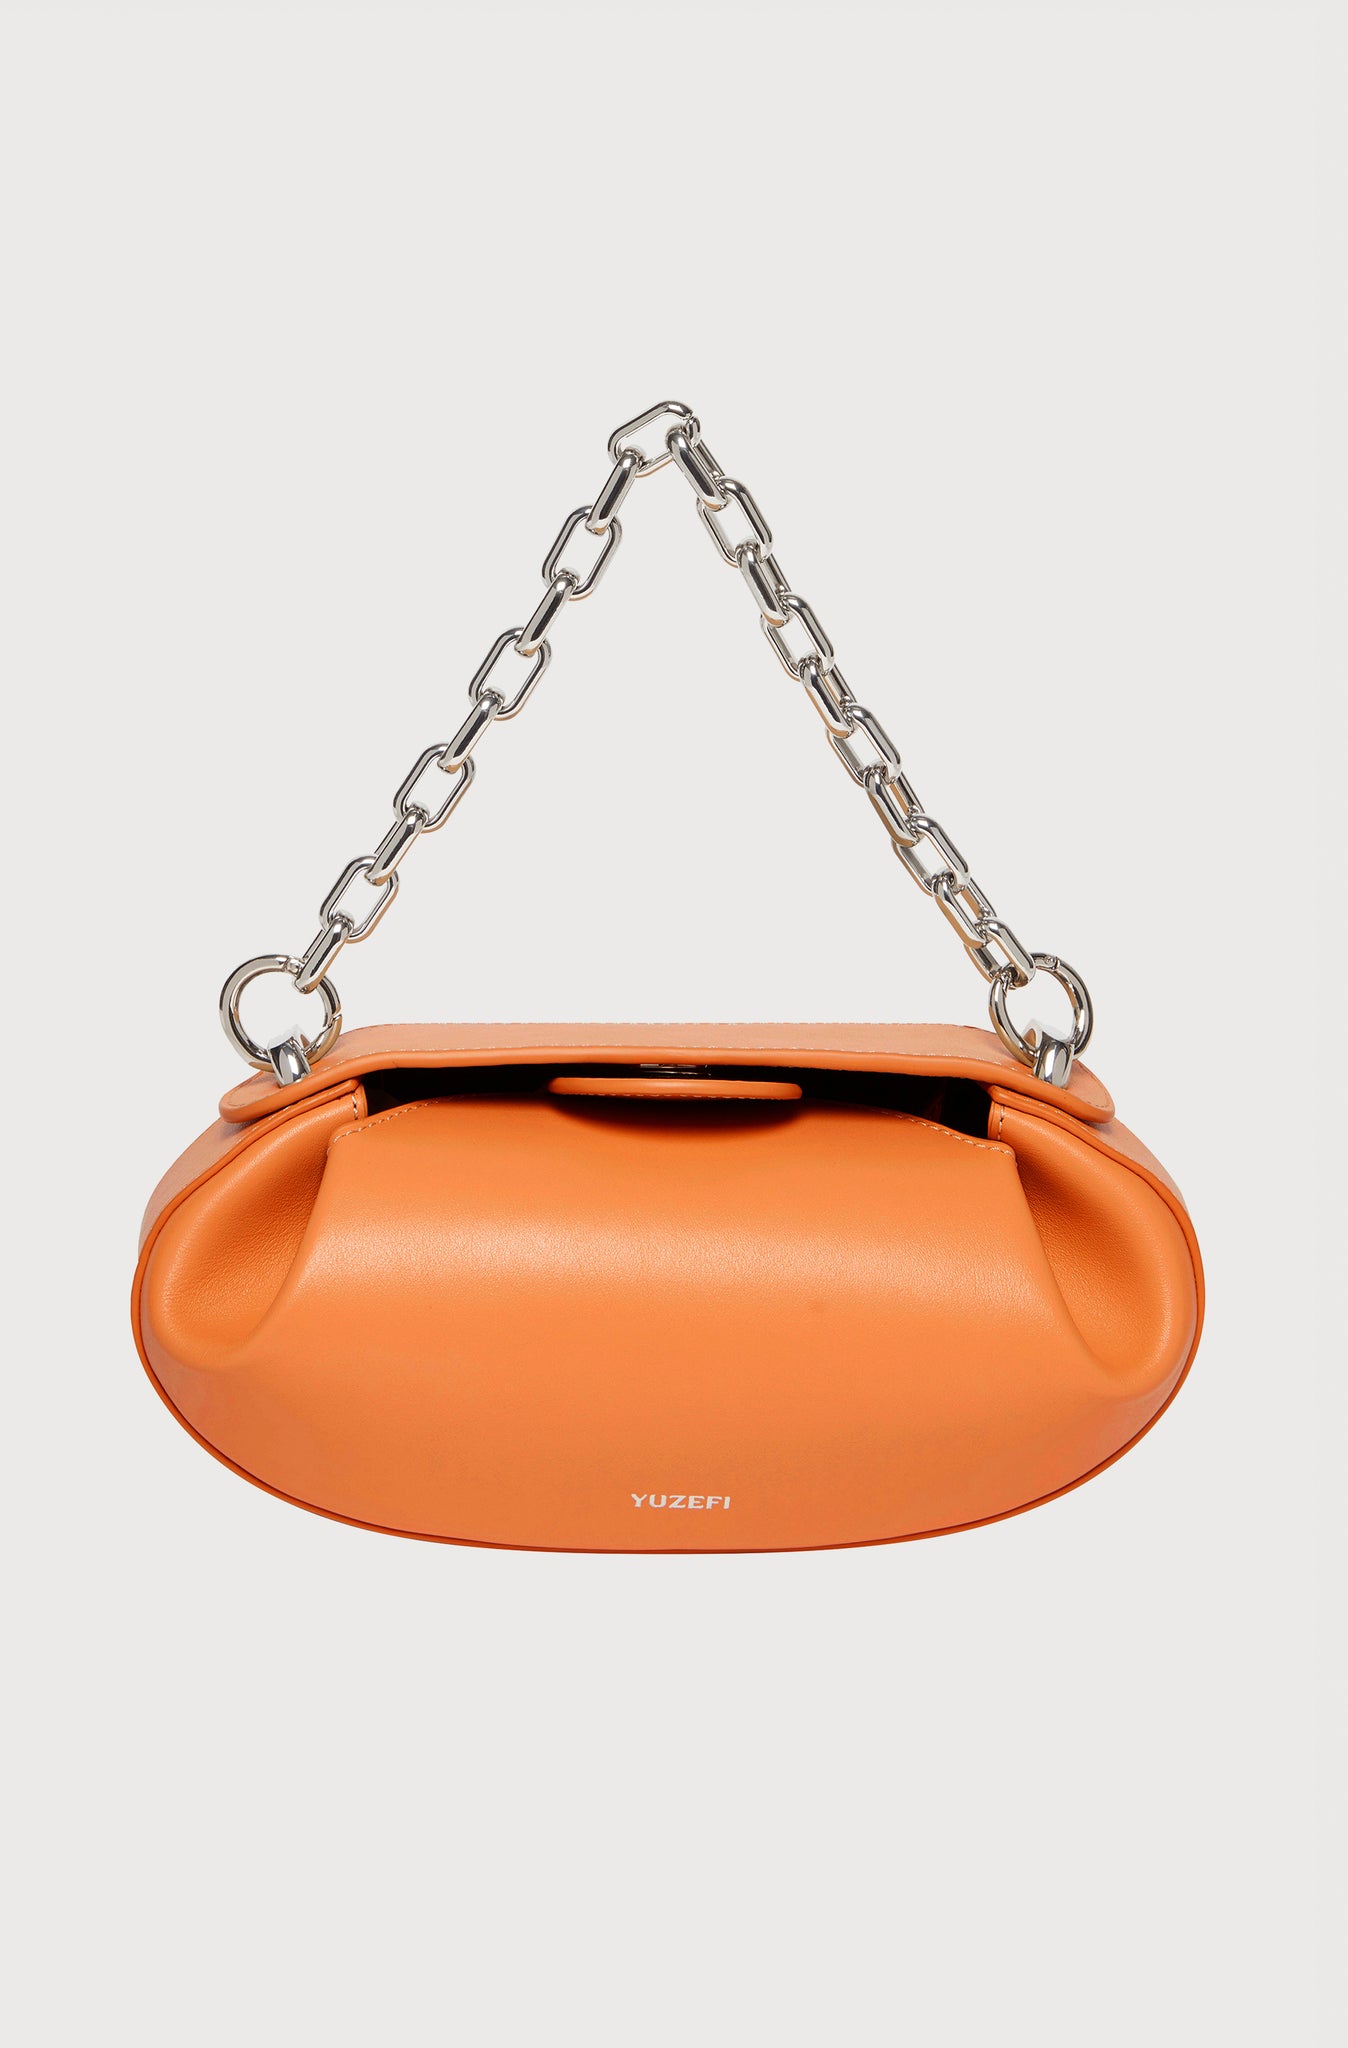 DINNER ROLL - ORANGE WITH SILVER CHAIN – Yuzefi